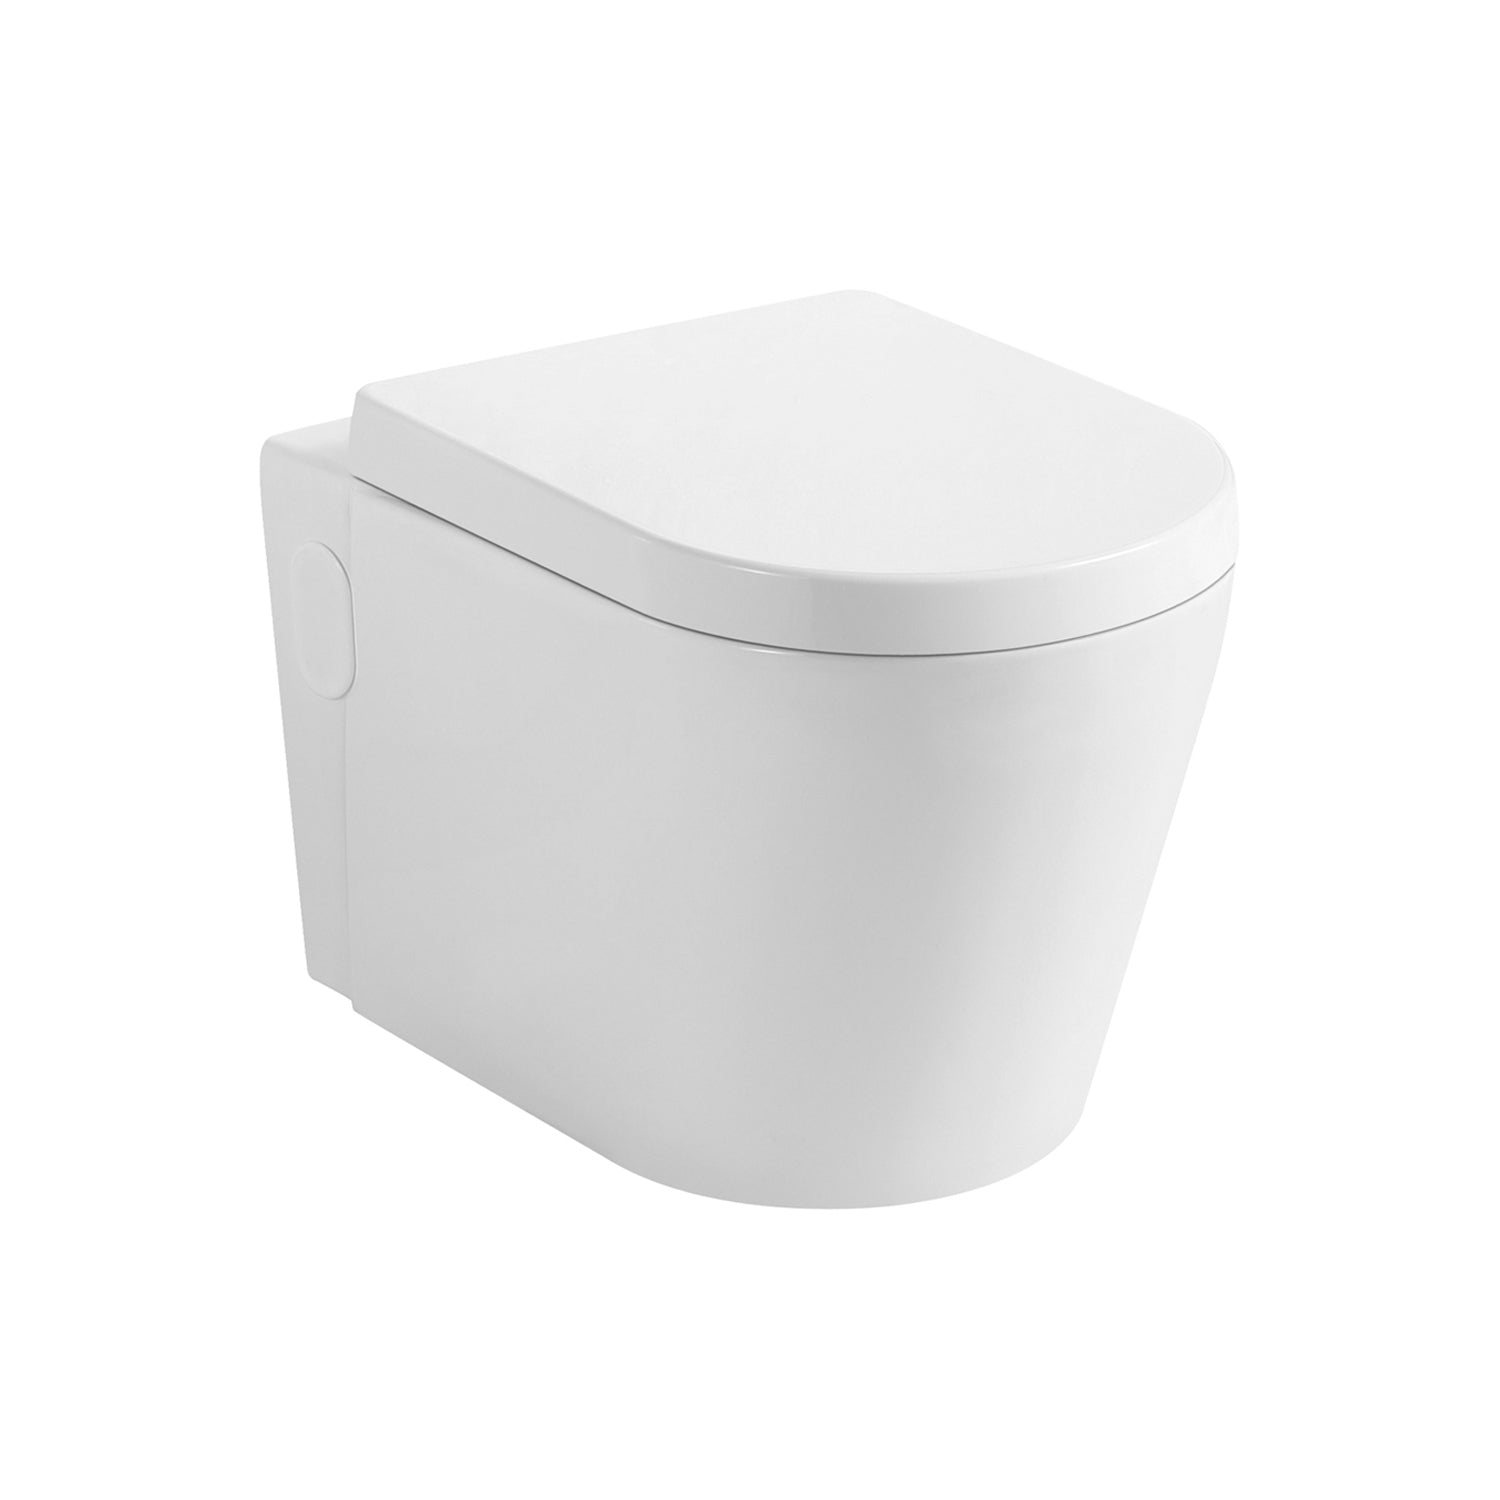 DAX One Piece Modern Oval Toilet, Wall Mount with Soft Closing Seat and Dual Flush High-Efficiency, Ceramic, White Gloss Finish, Height 12-3/5 Inches (BSN-CL11025-17)